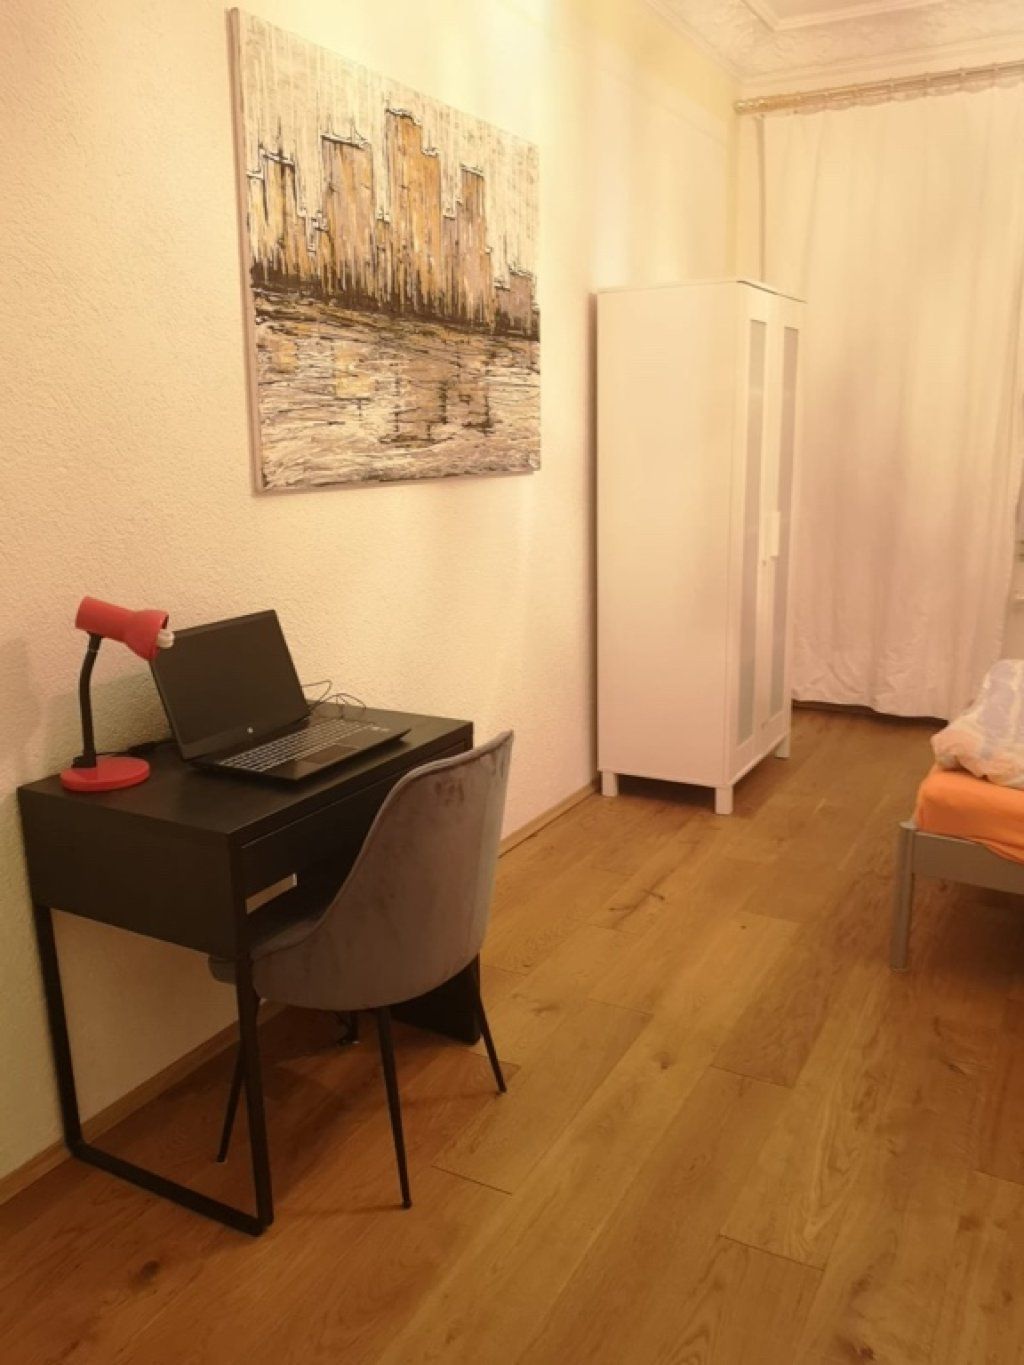 Great and comfortable temporary apartment in urban location of Leipzig